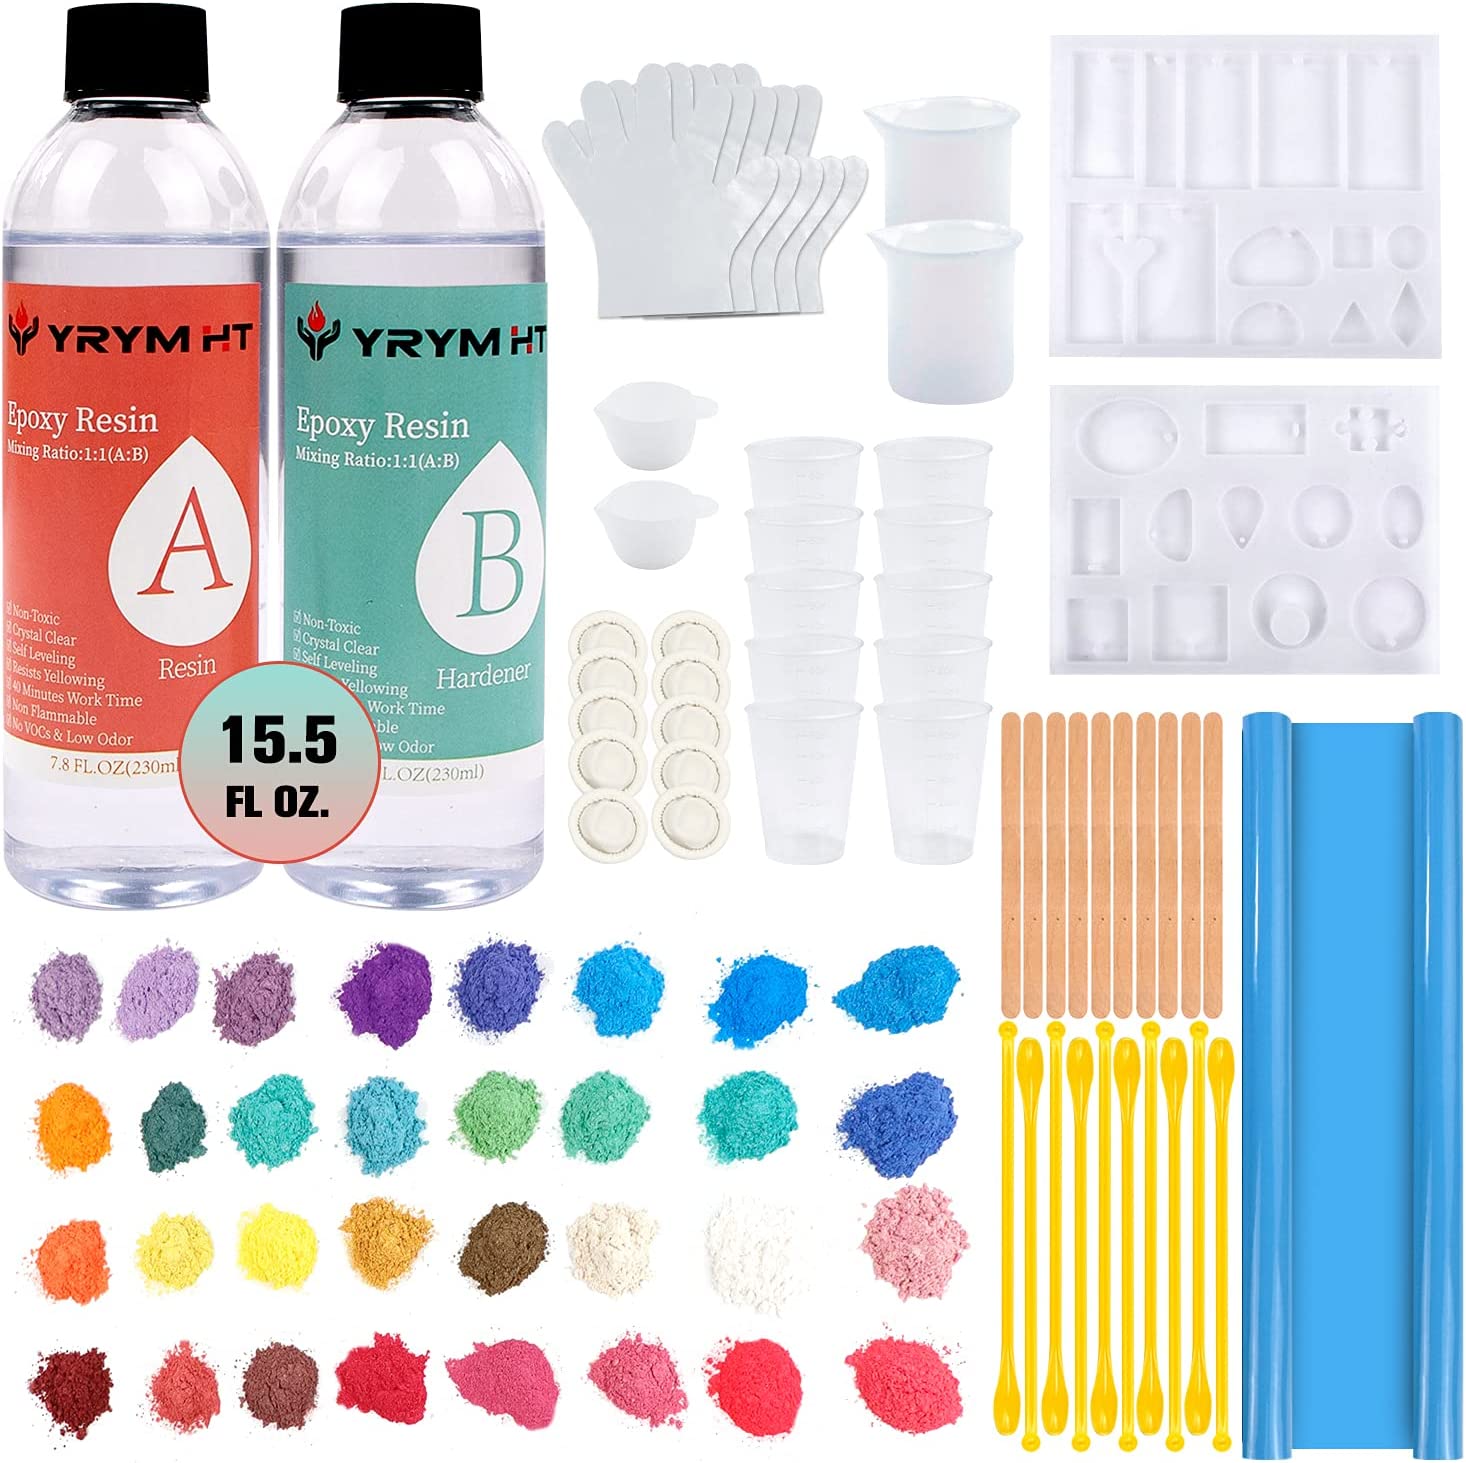 Epoxy Resin Jewelry Making Kit - DIY Kits For Beginners With